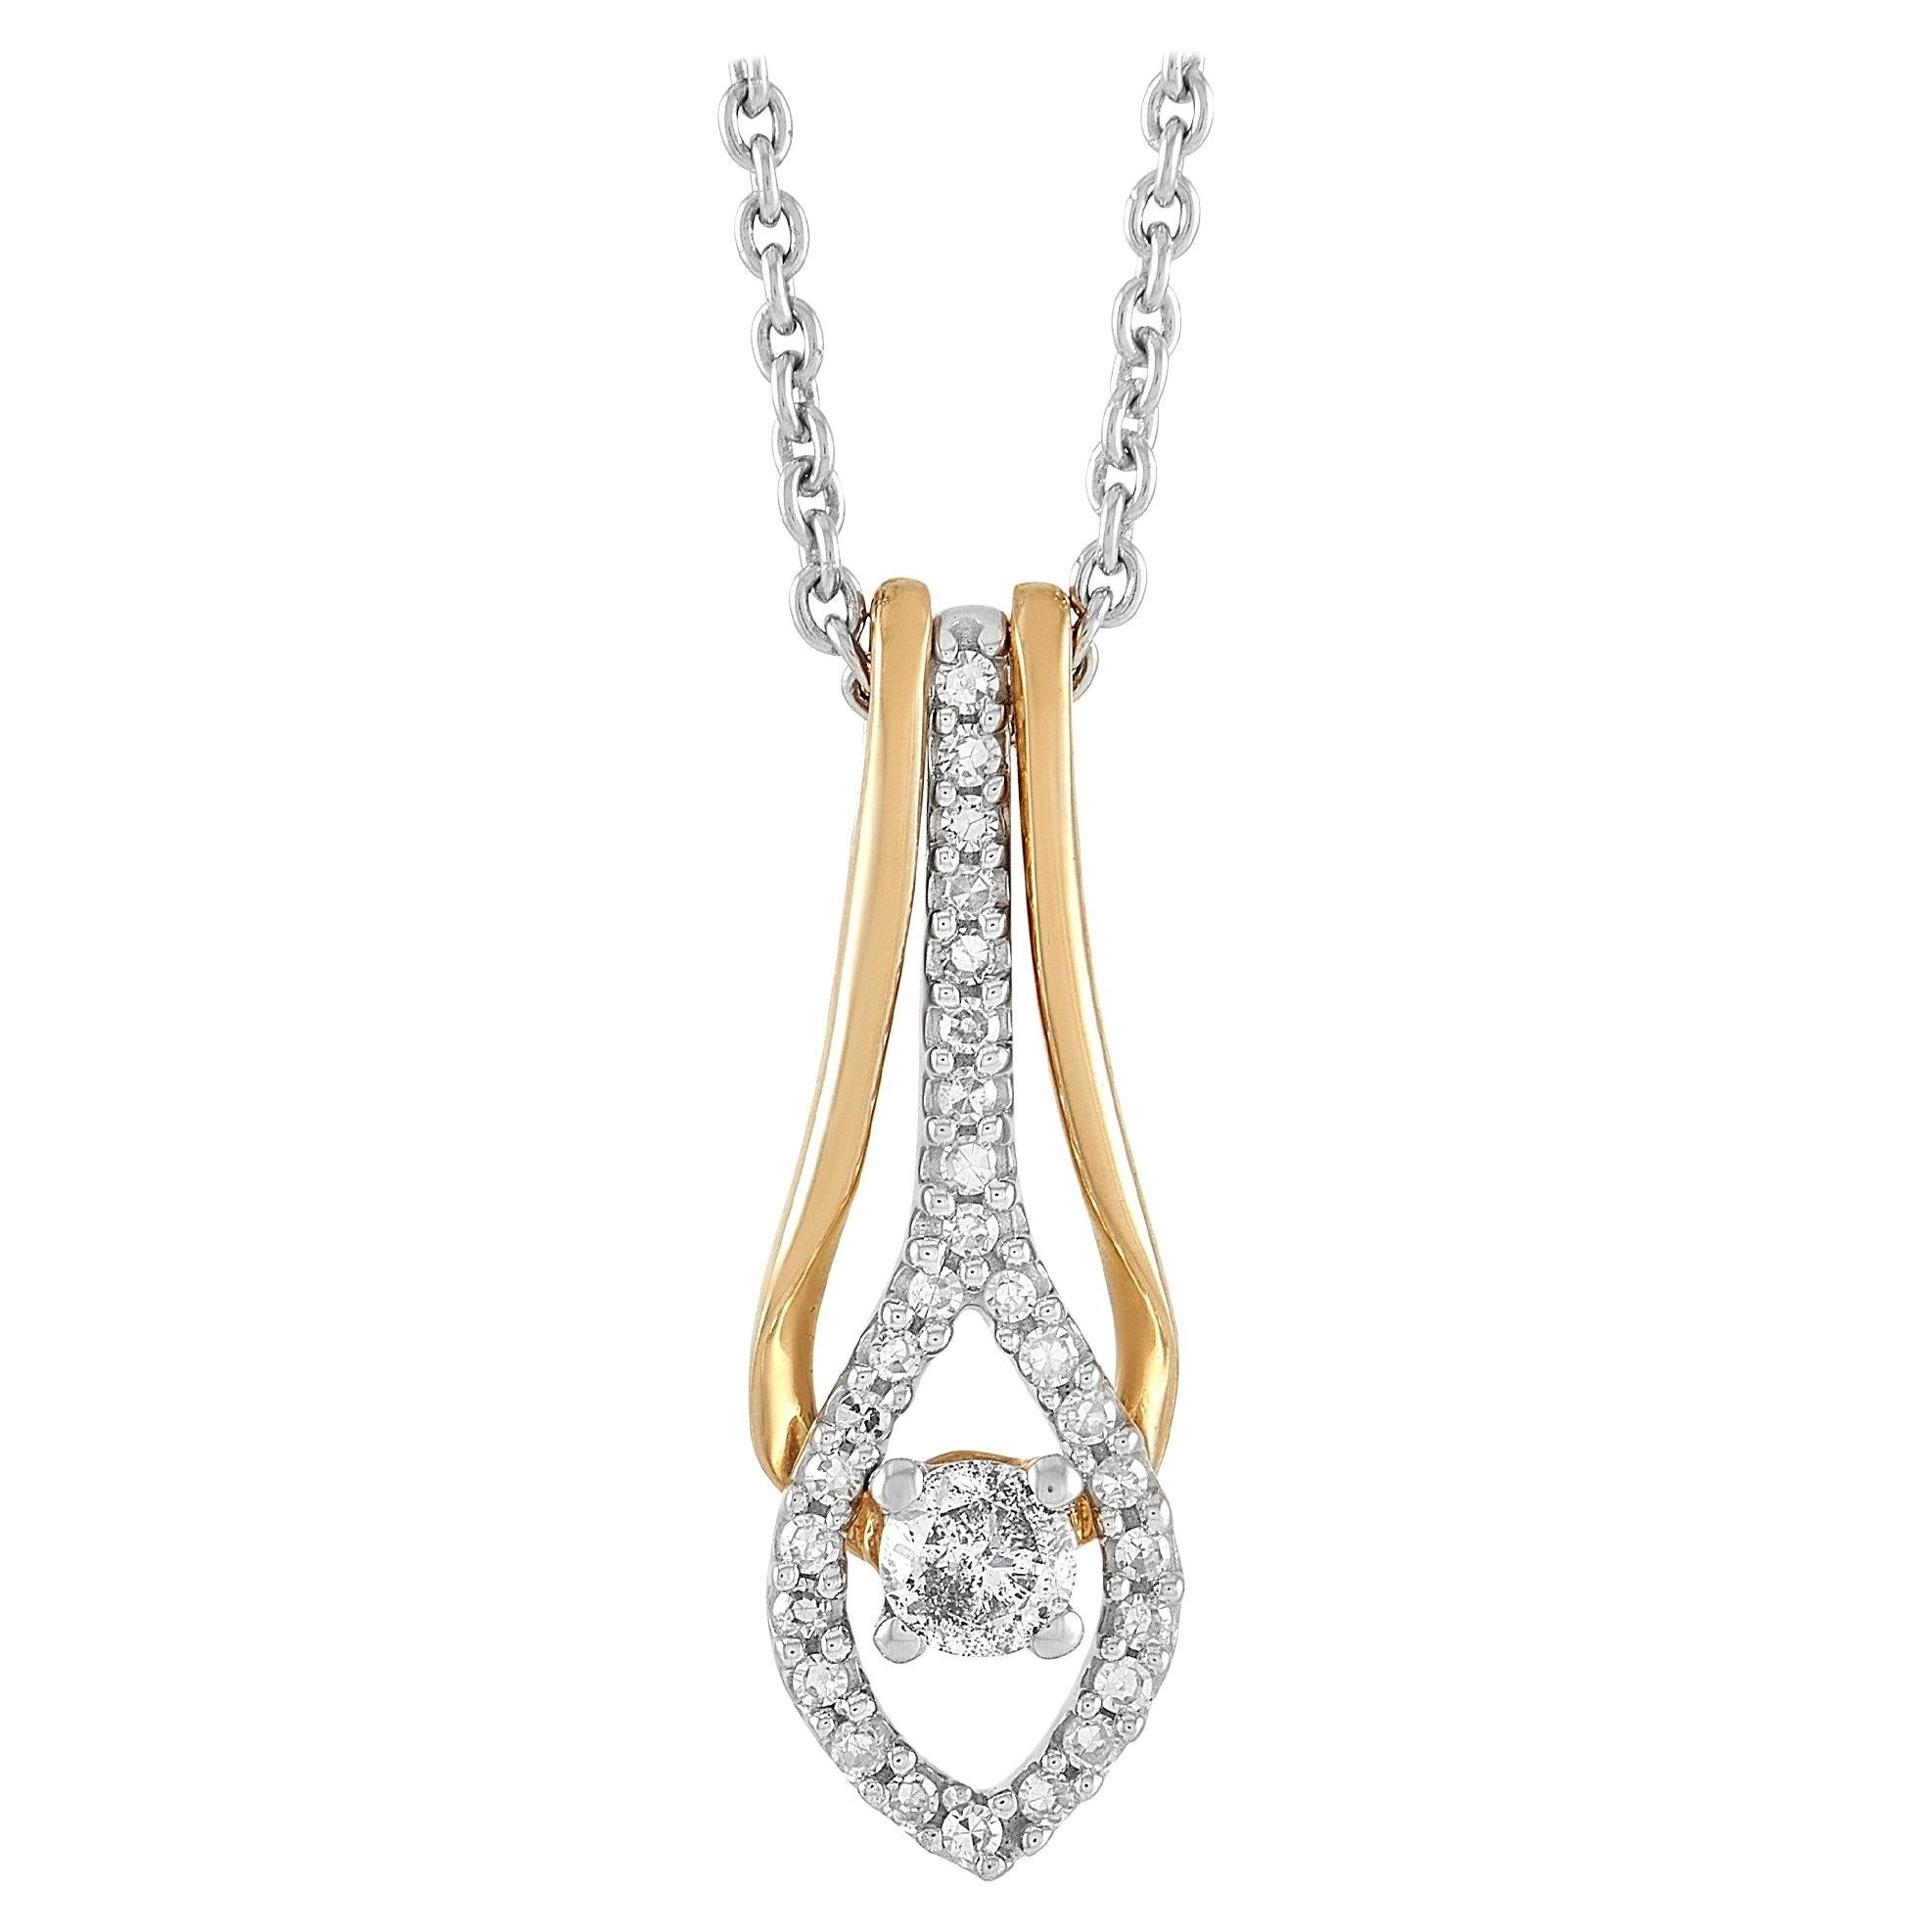 LB Exclusive 10k White and Yellow Gold 0.25 Ct Diamond Pendant Necklace